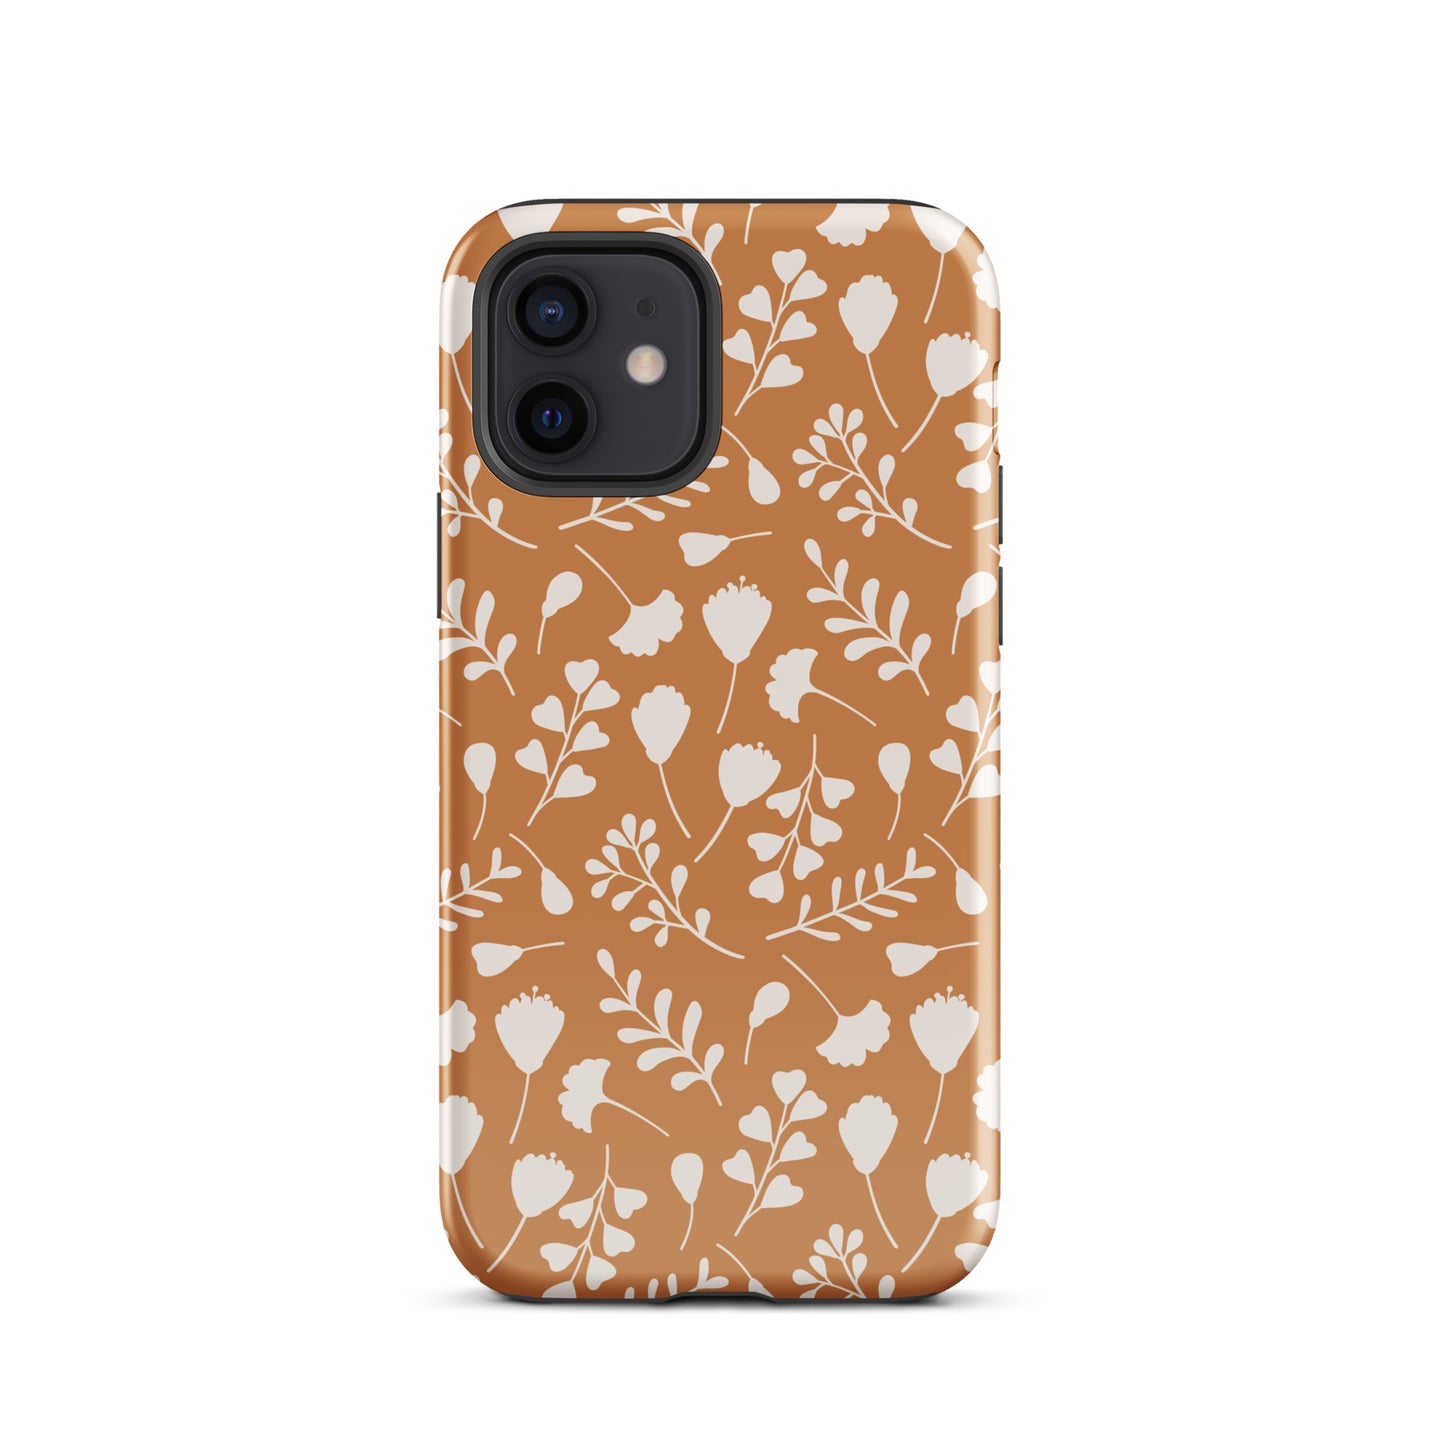 Autumn Bloom iPhone Case iPhone 12 Glossy